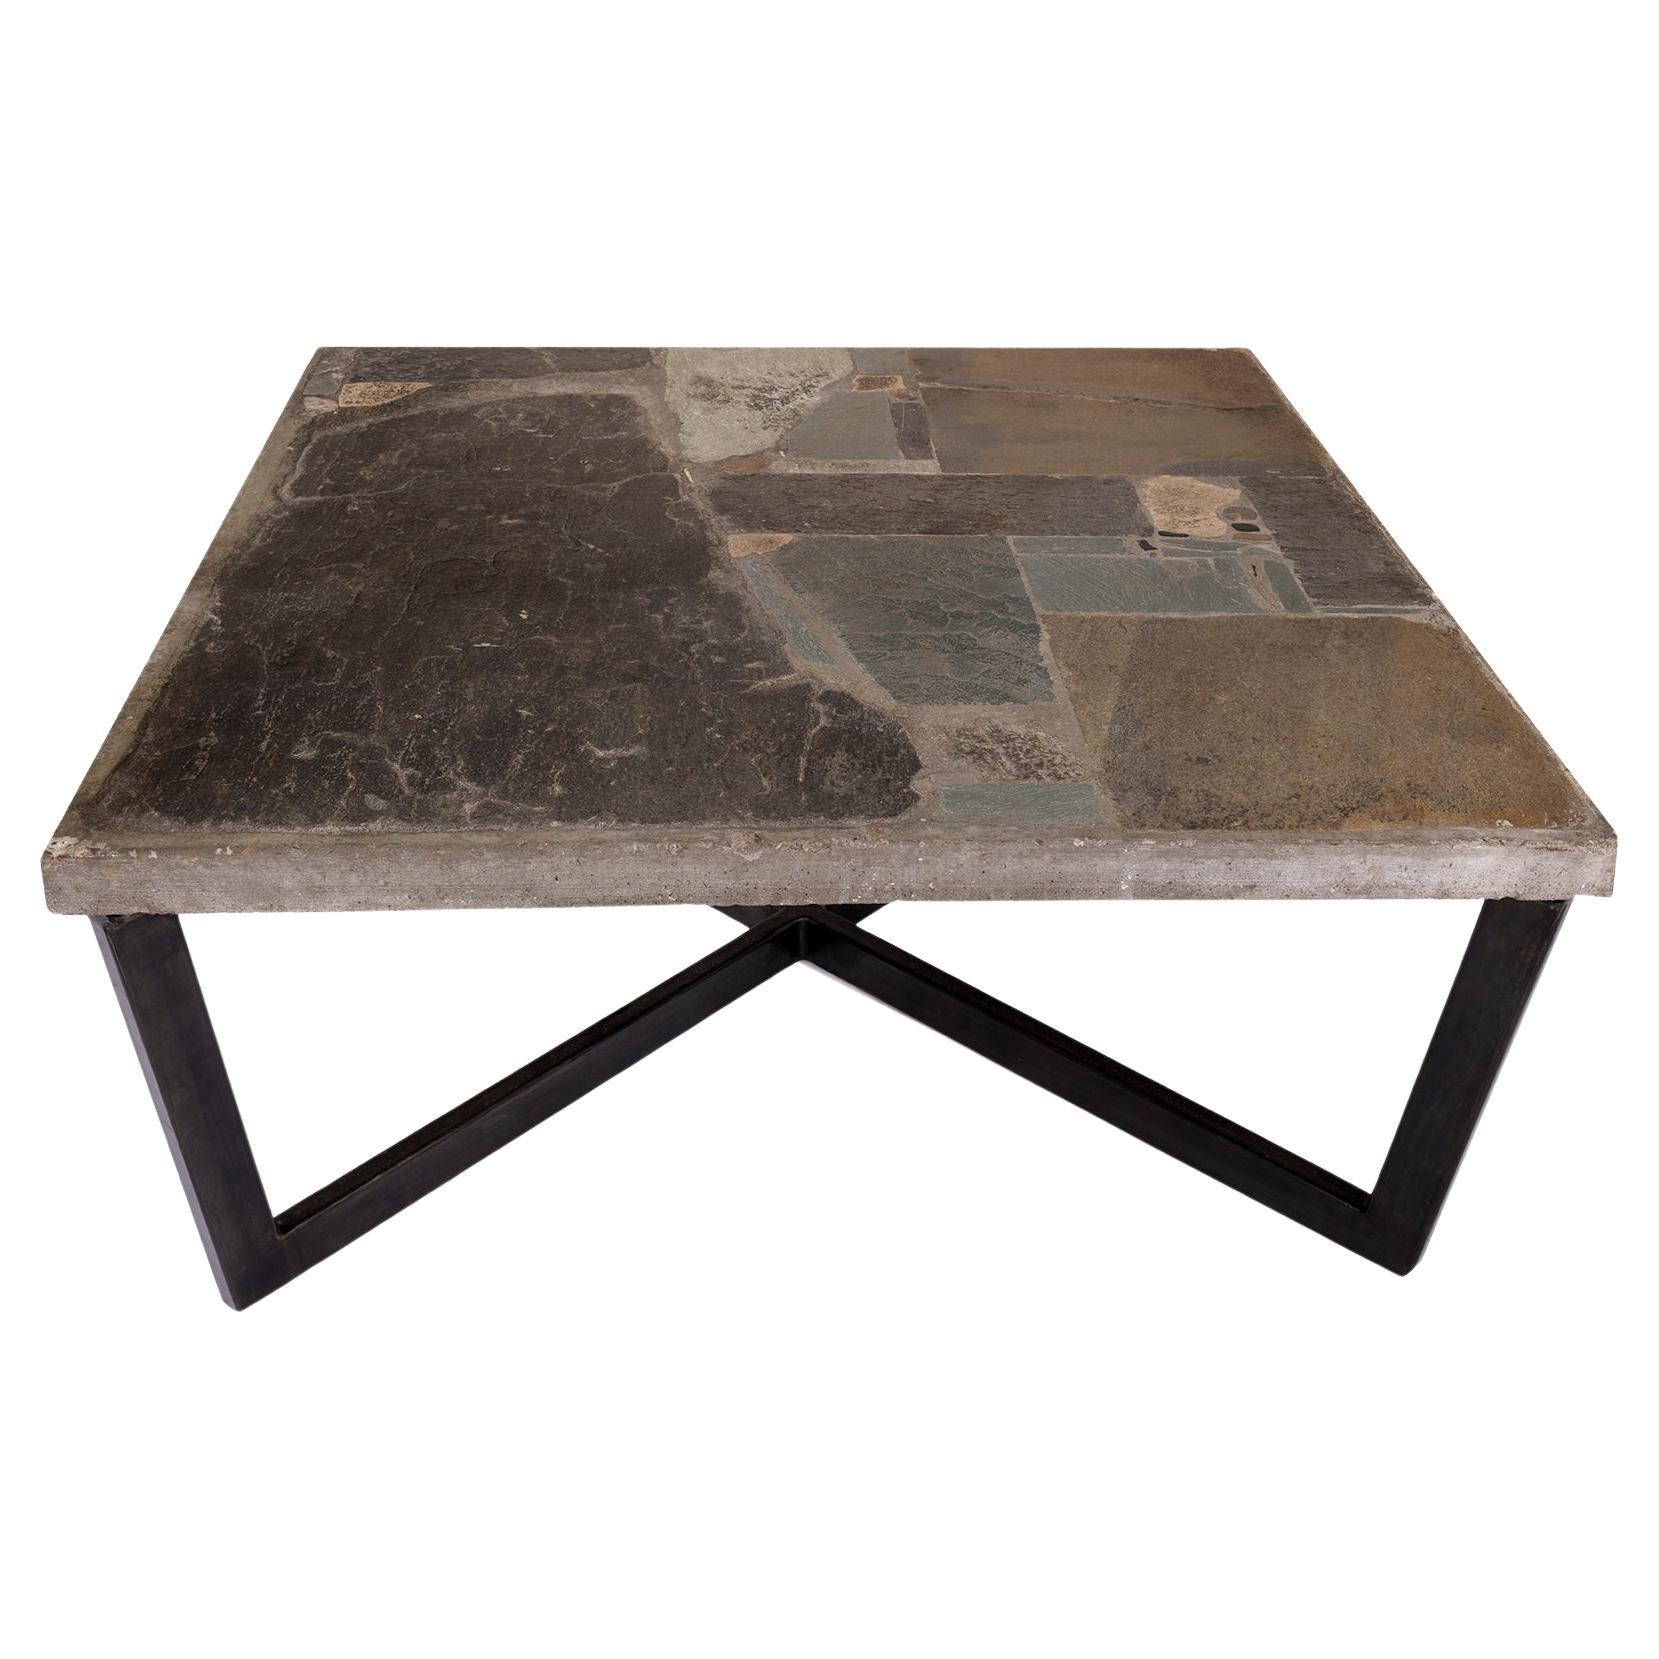 Stone Mosaic Coffee Table For Sale